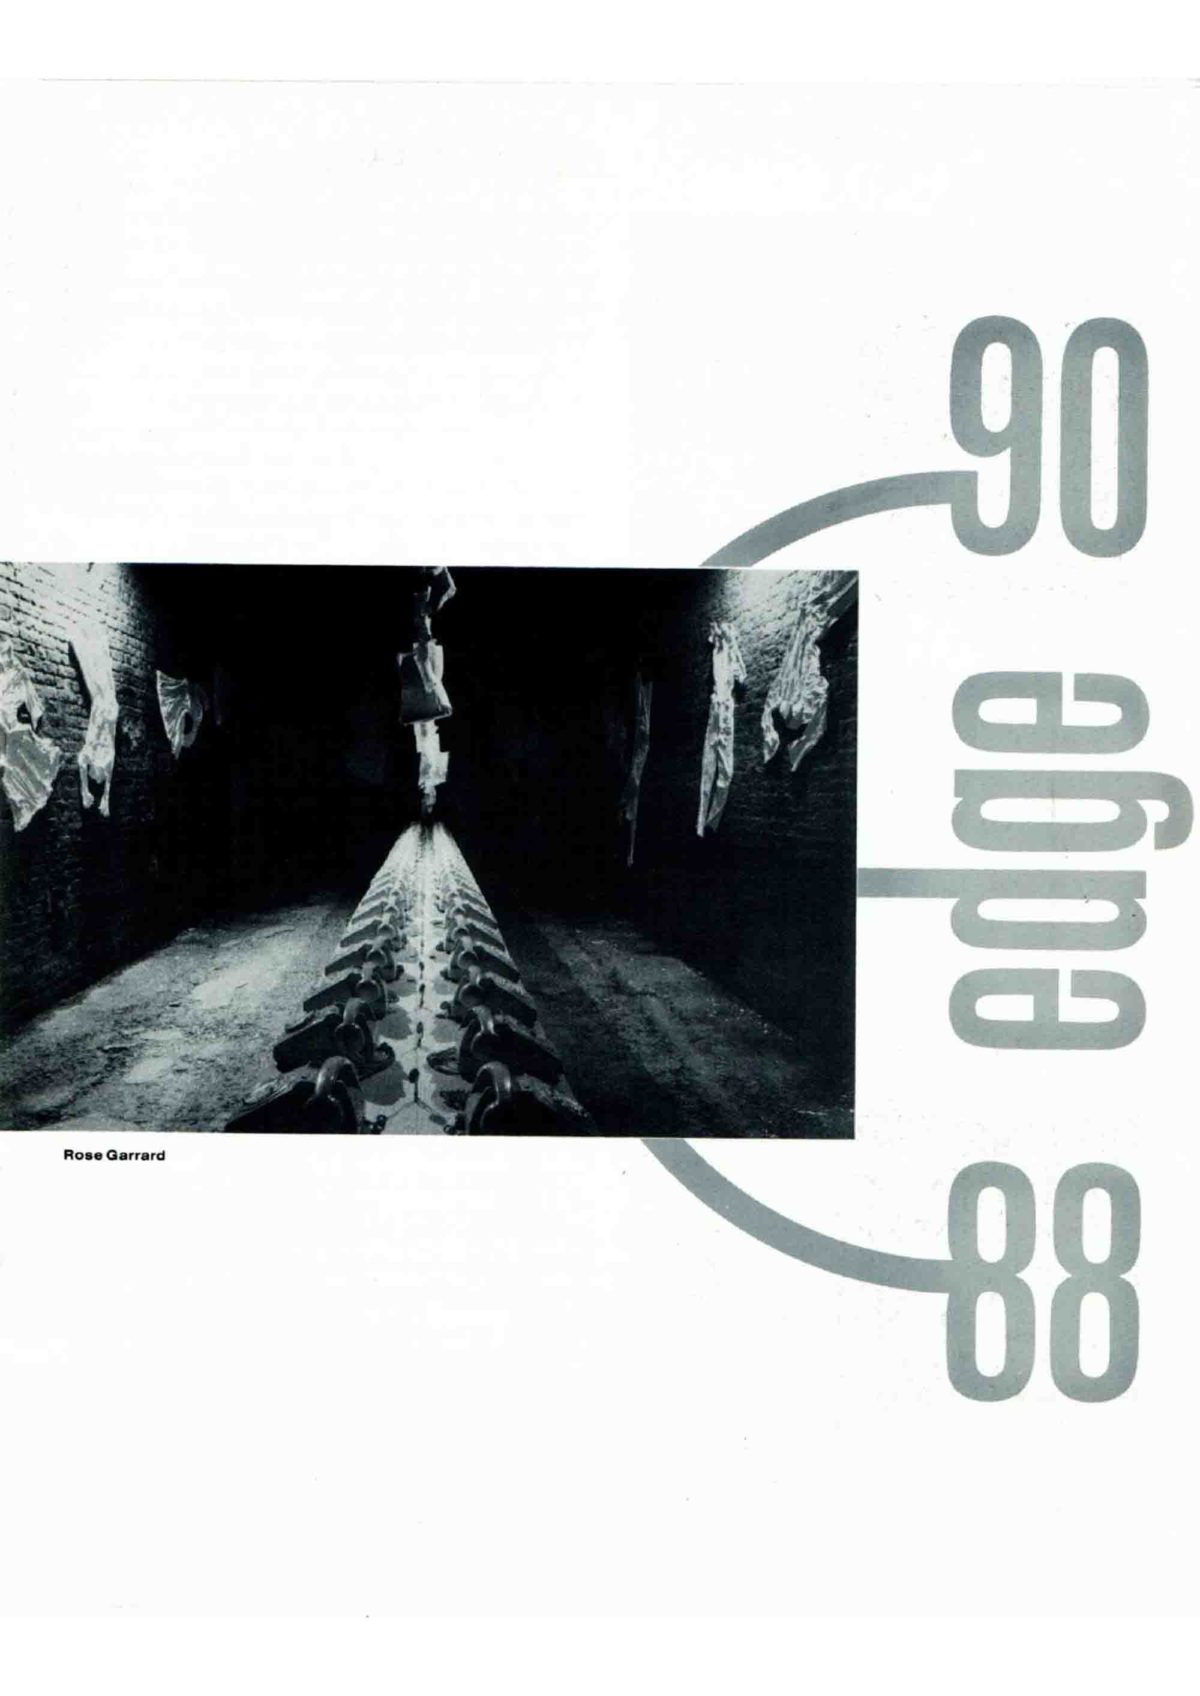 EDGE 88-99 Booklet, 1988 (Page 3 of 11)